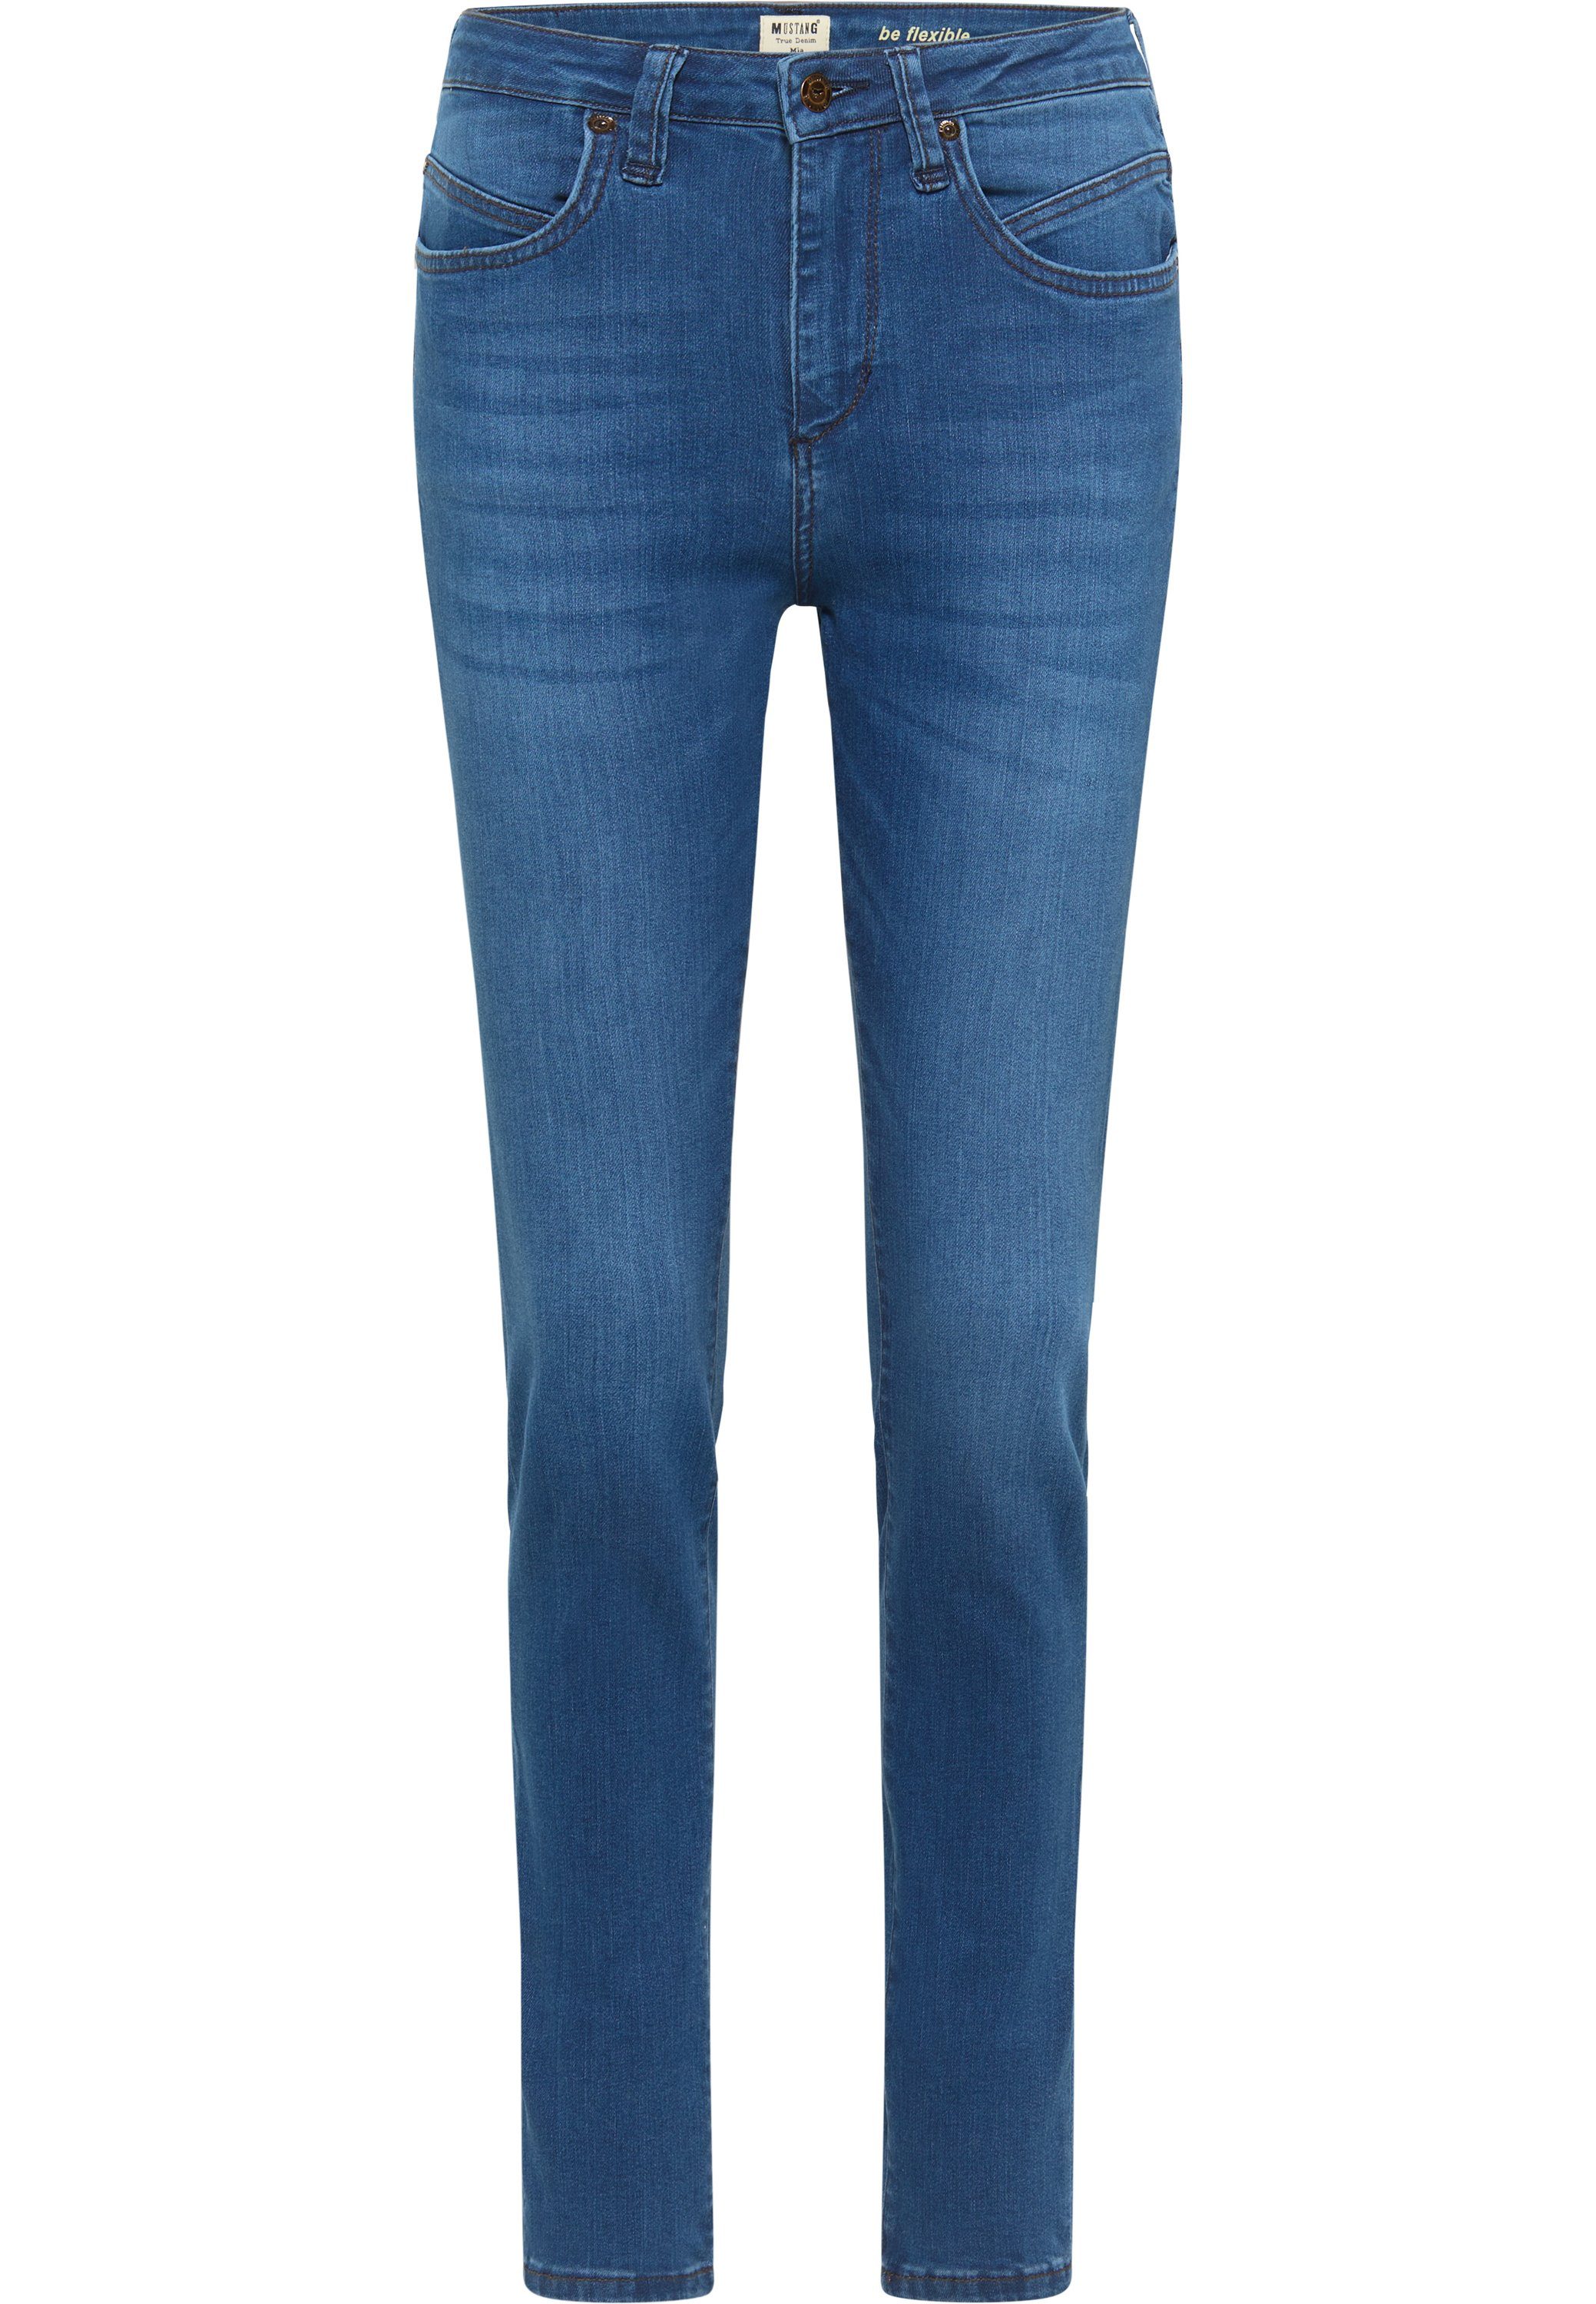 Mustang Skinny fit jeans Mia jeggings